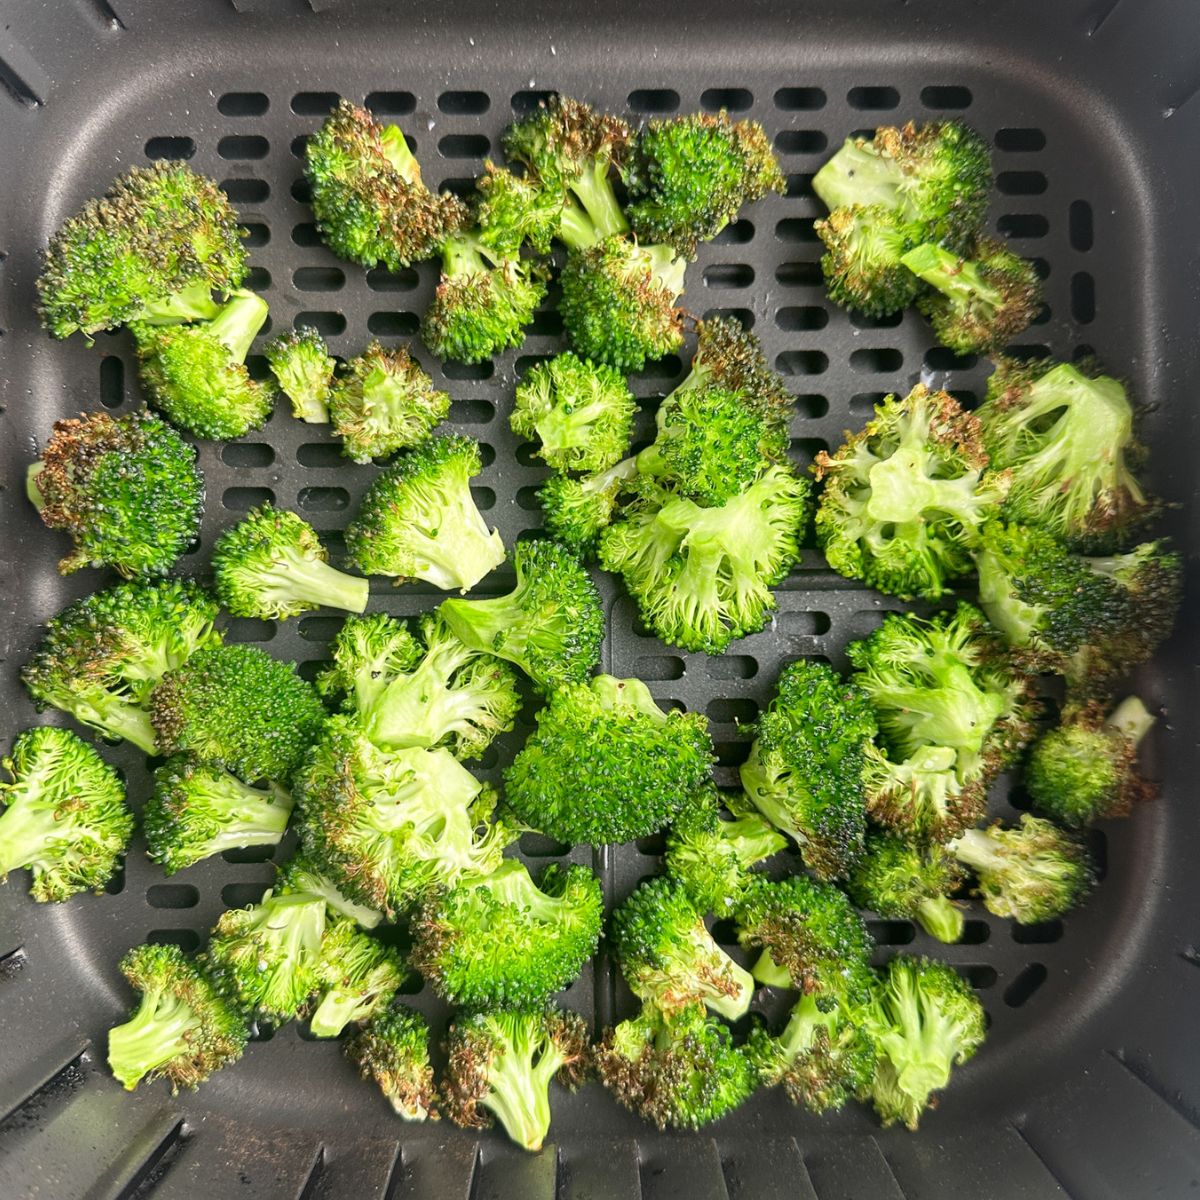 Roasted broccoli in an air fryer. 